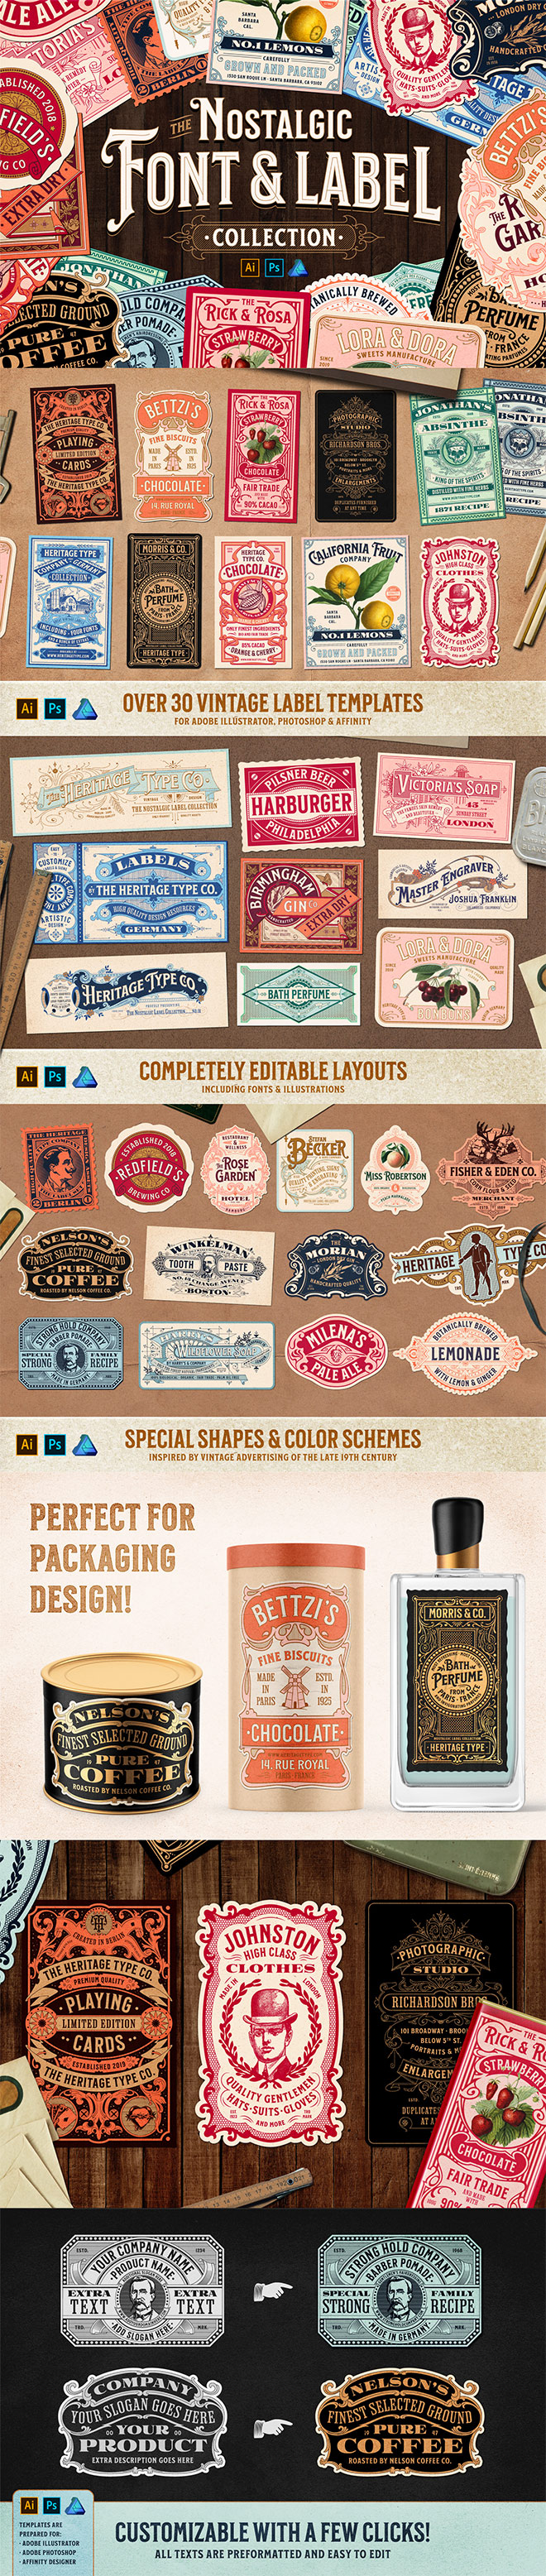 Save 34% off the Nostalgic Font and Label Collection